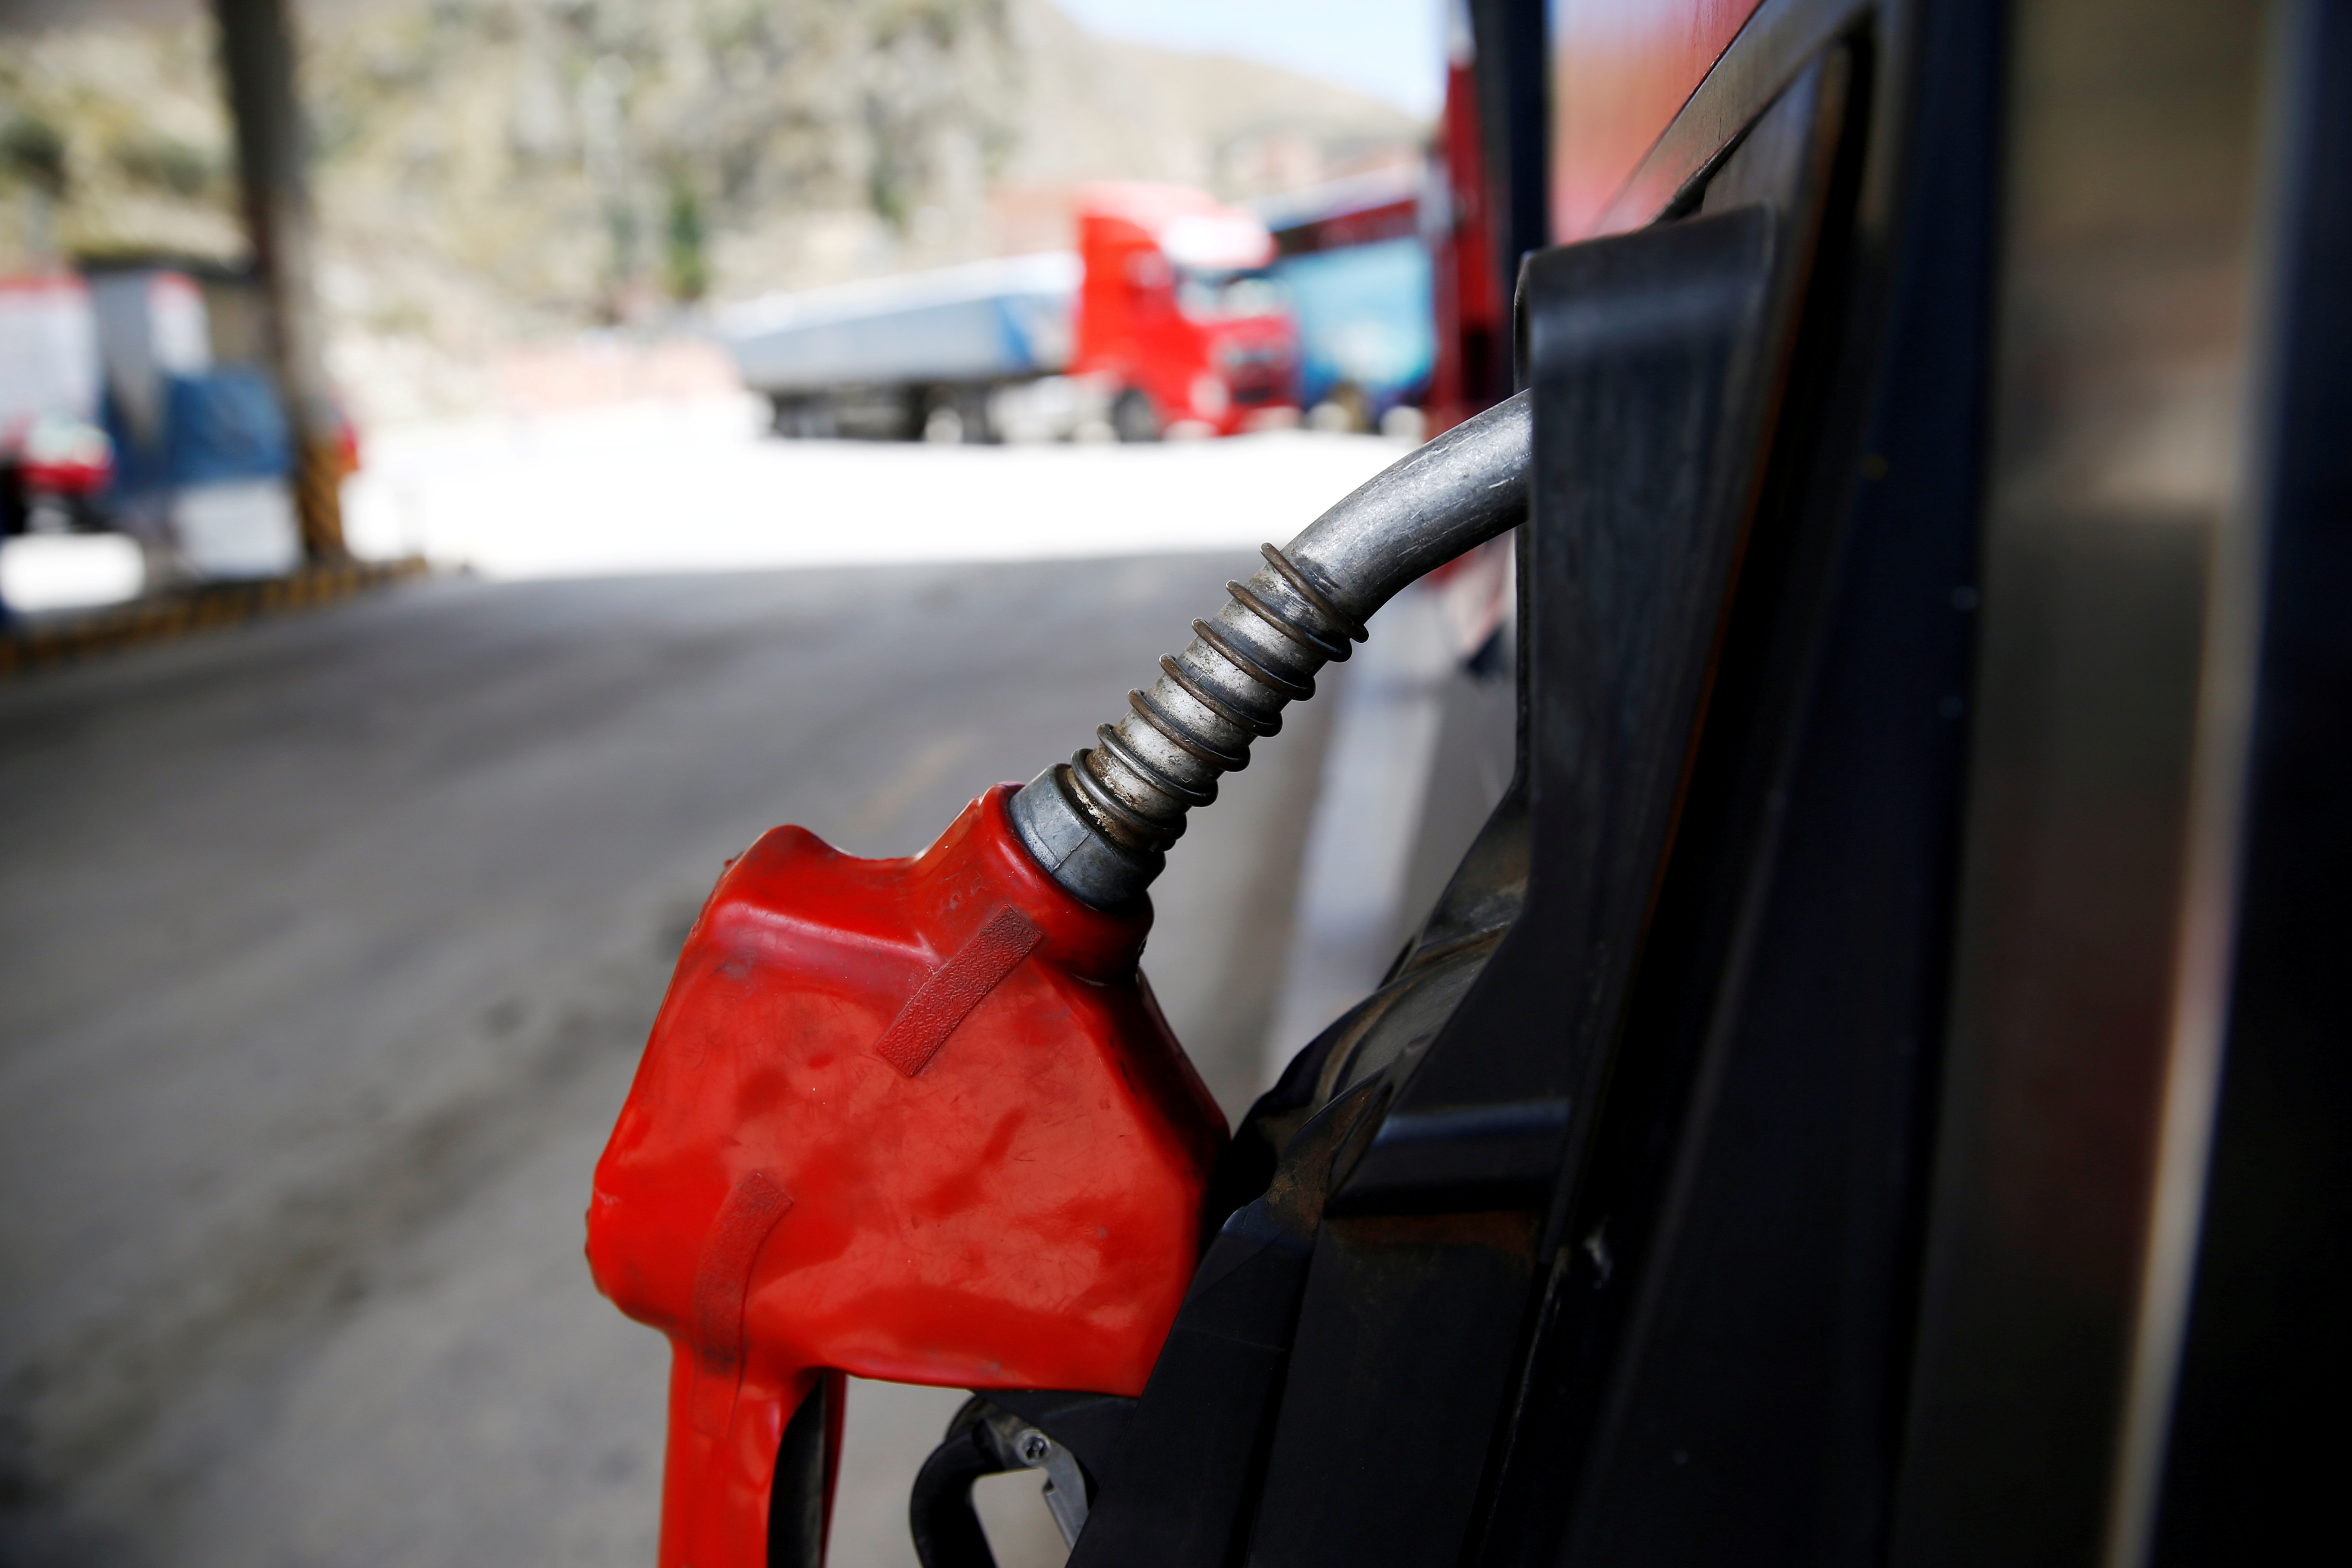 A closed petrol pump is seen in Chuquiaguillo, on the outskirts of La Paz